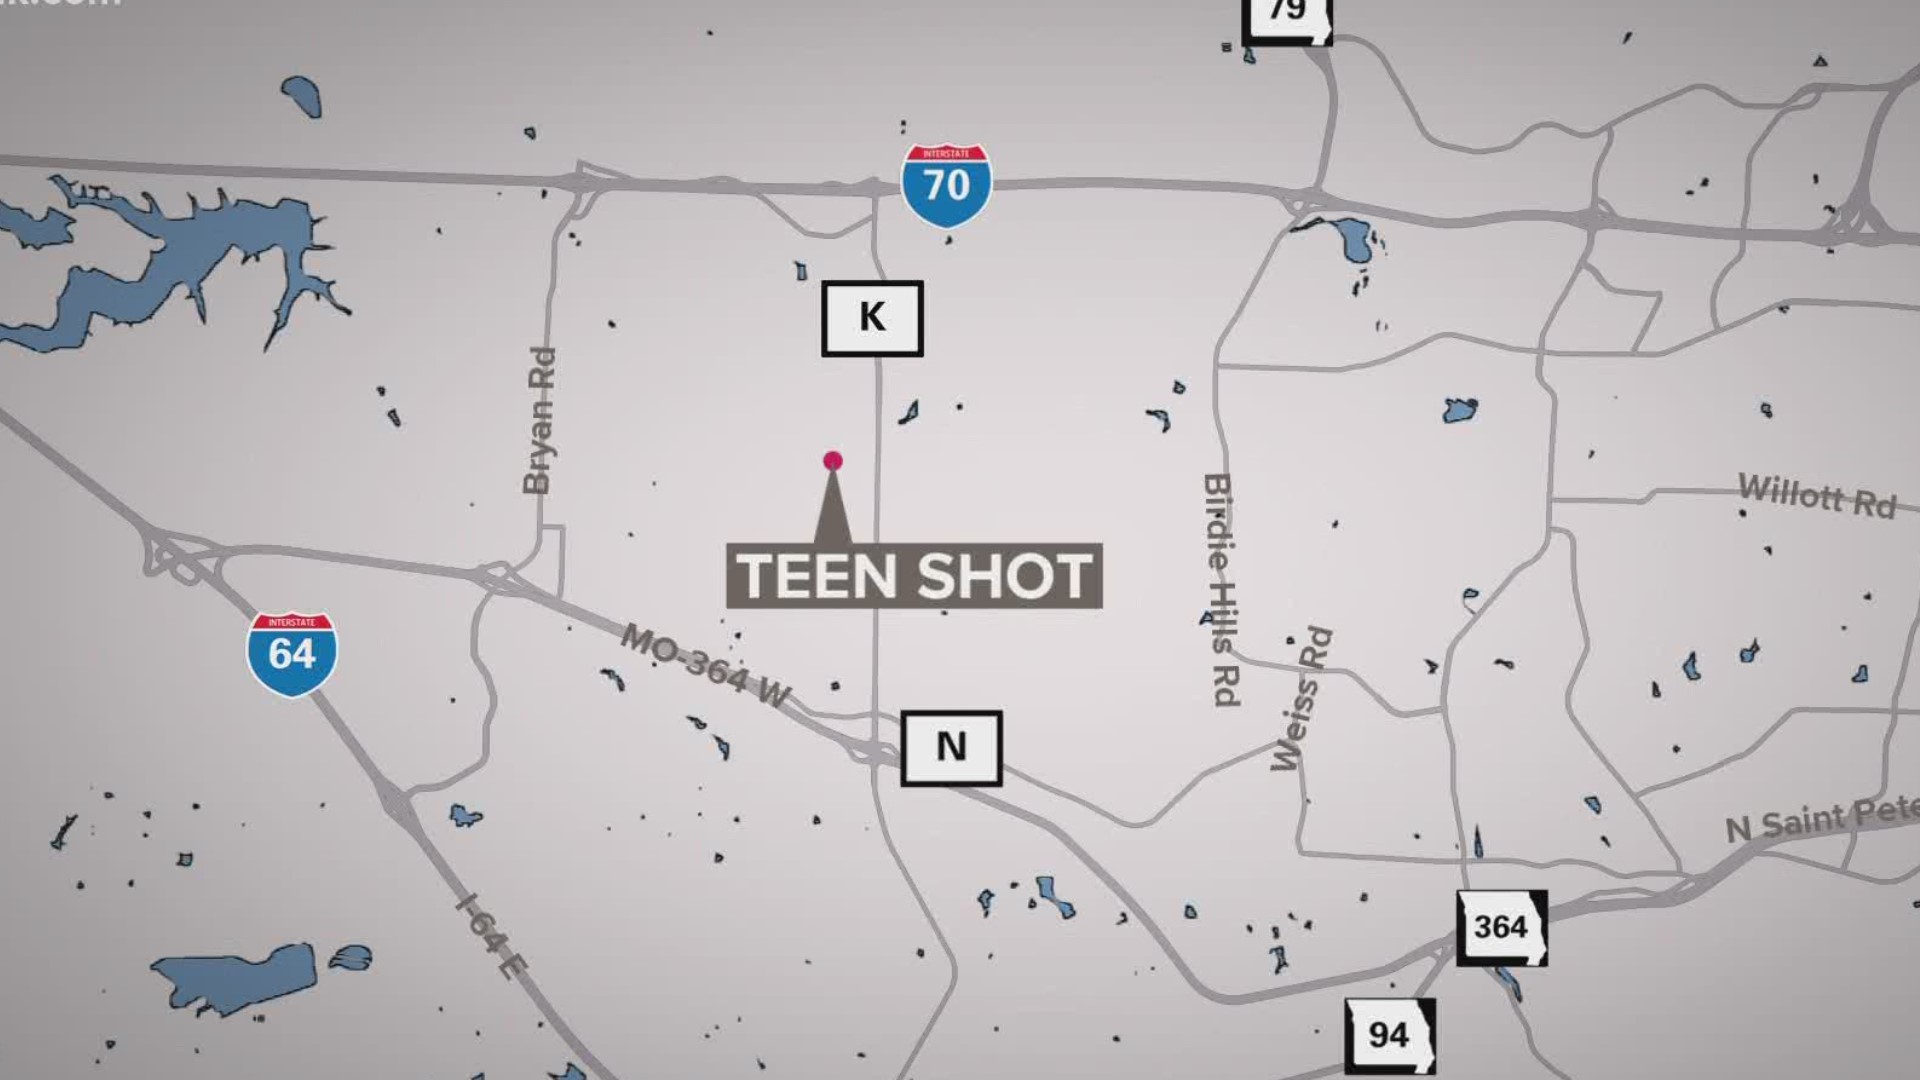 A 16-year-old is being held by juvenile authorities pending further investigation, police said